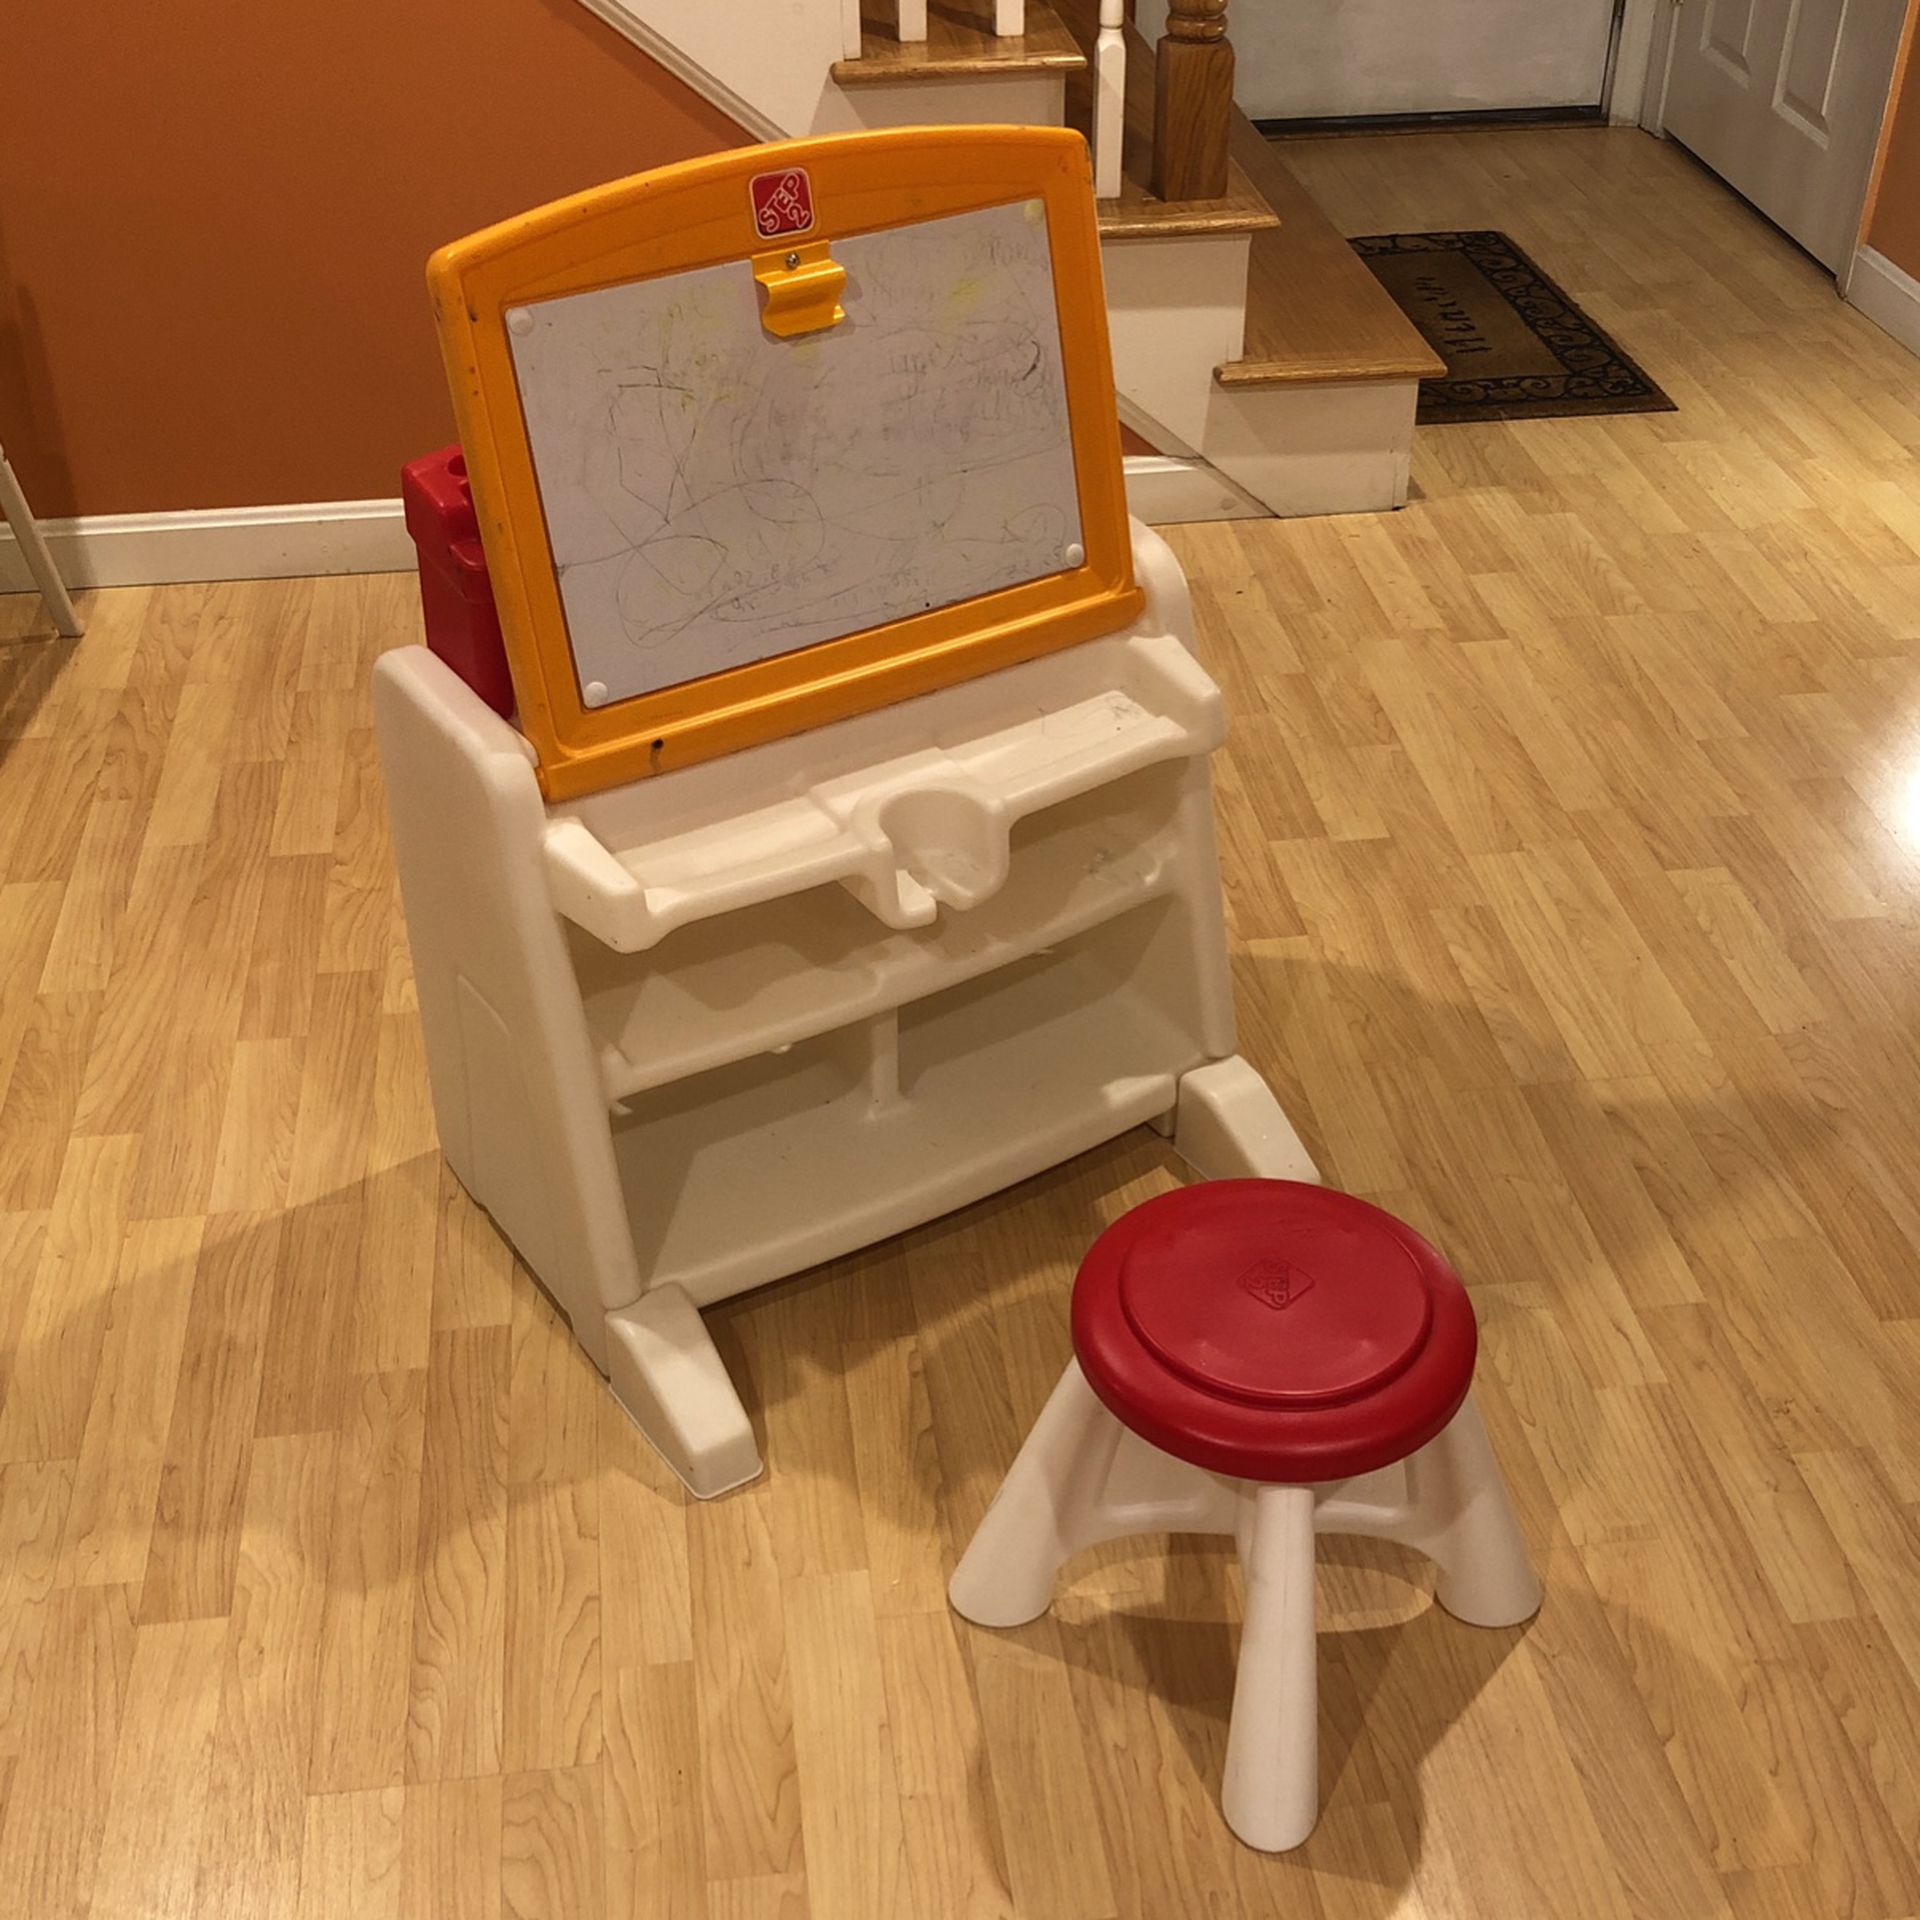 Kids activity desk with stool